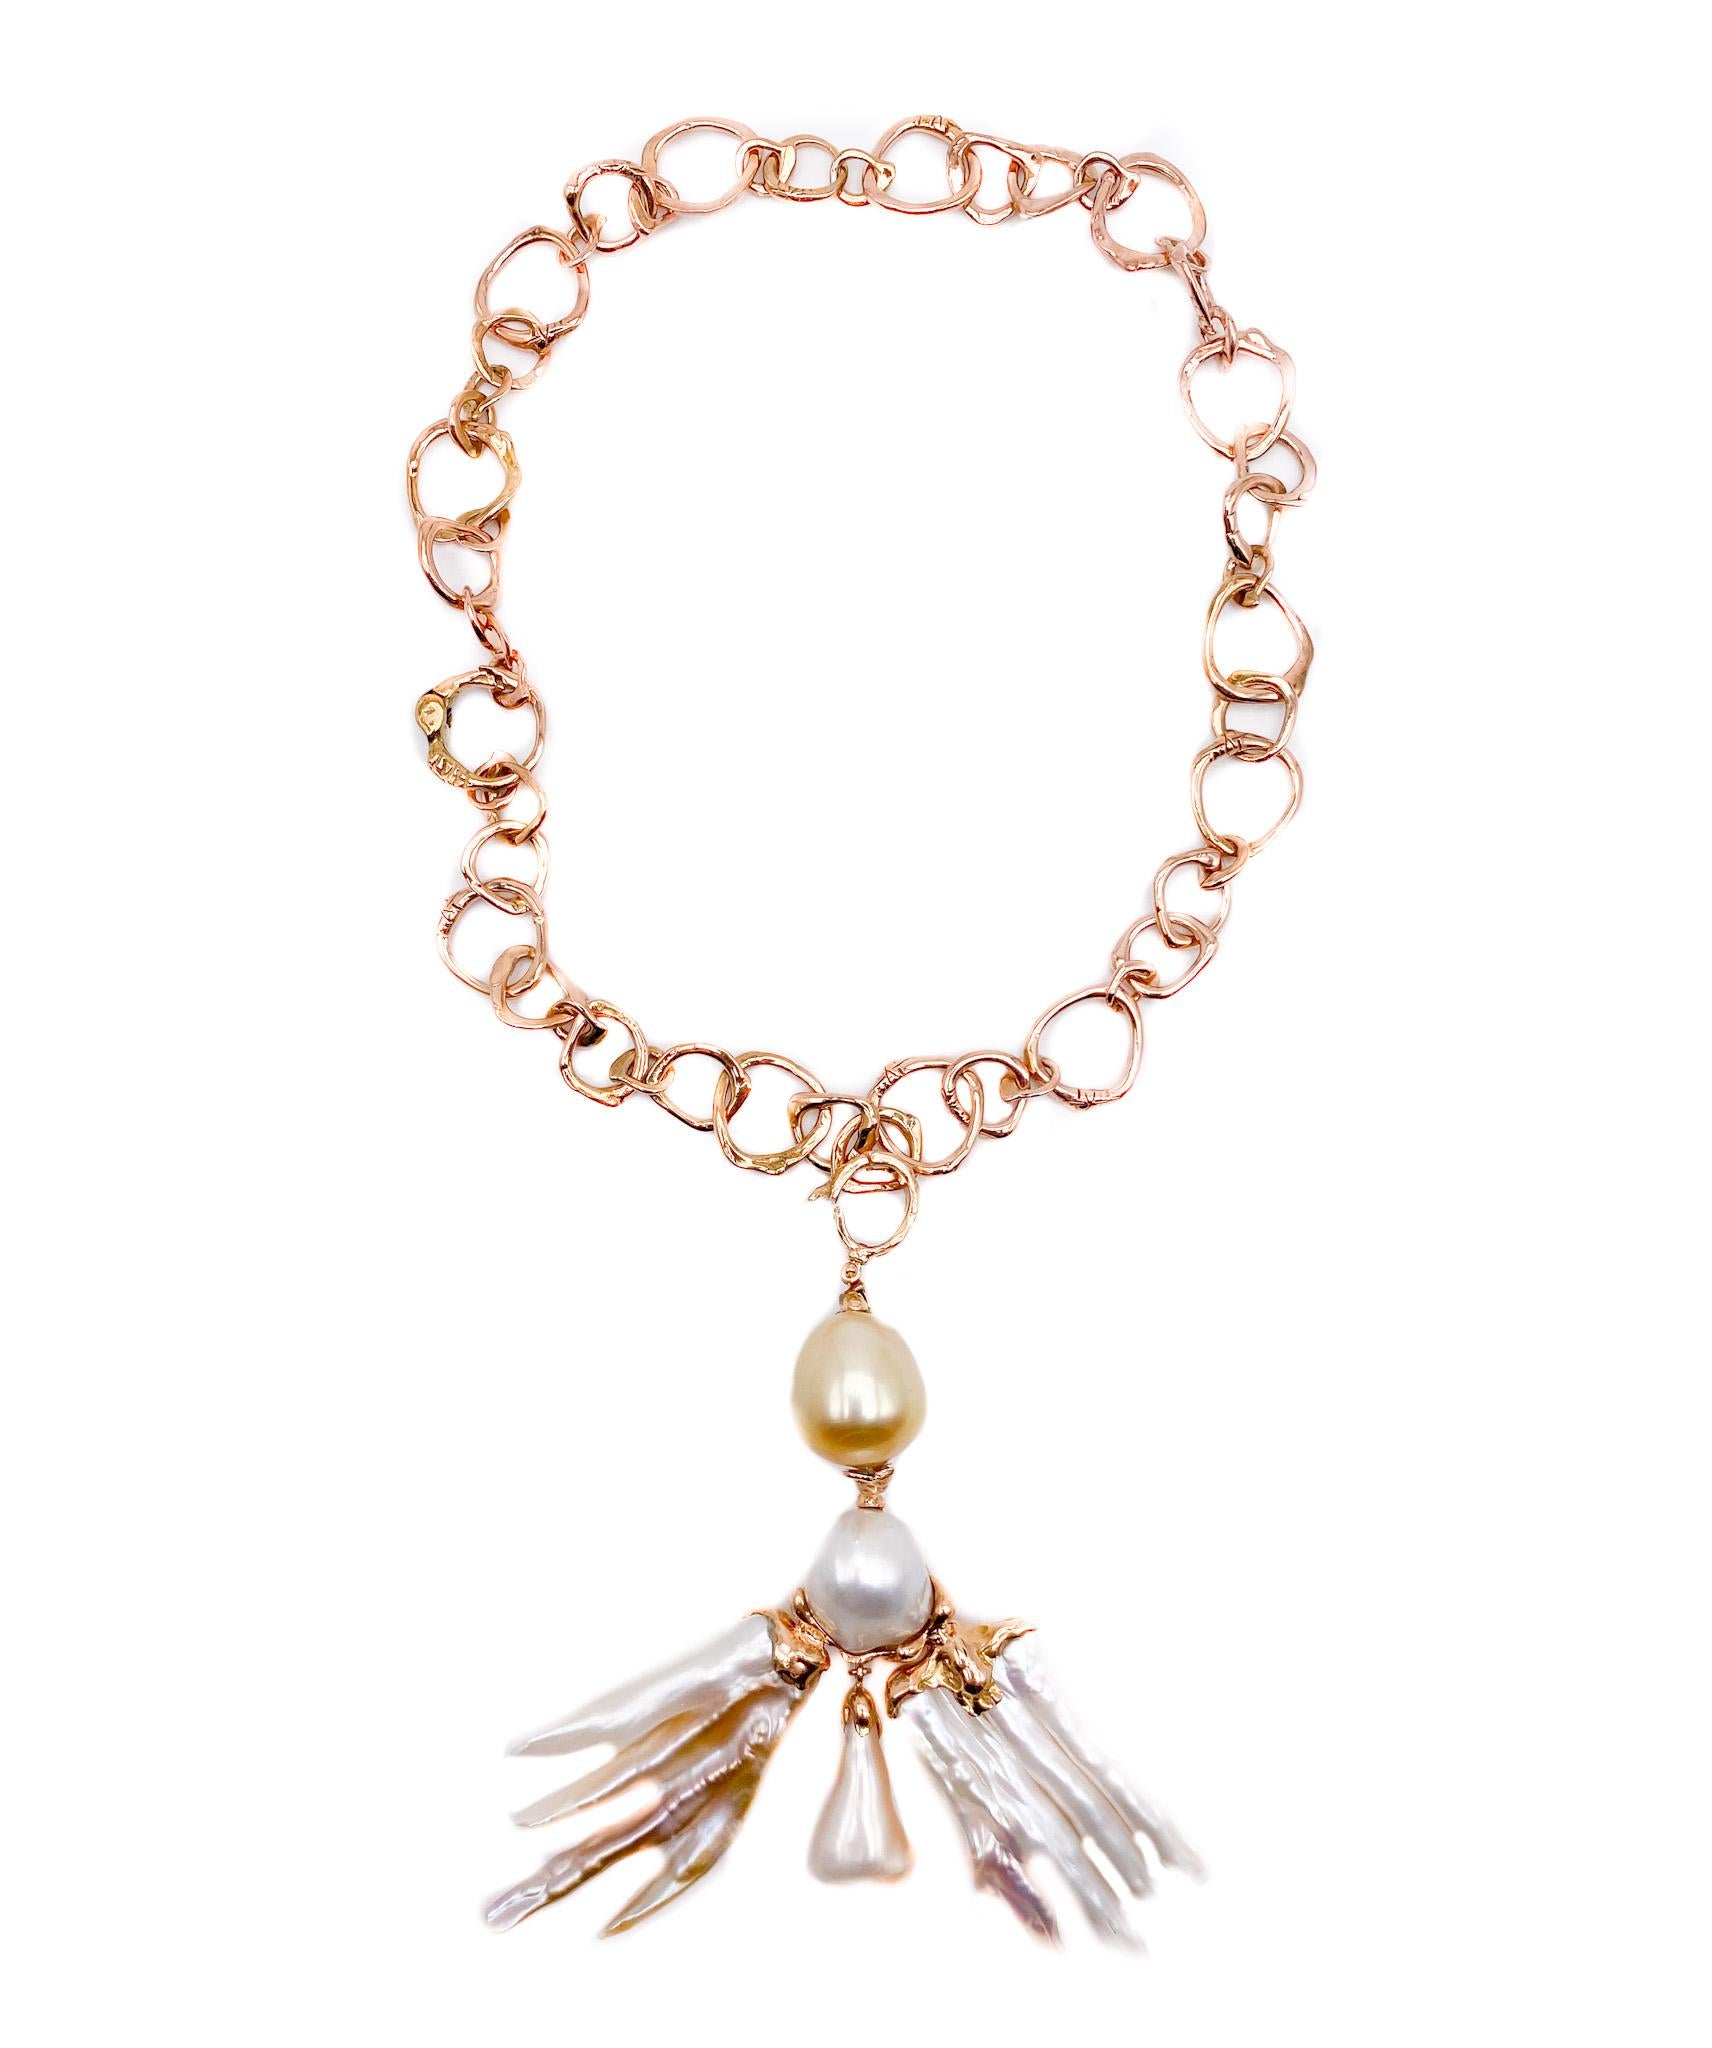 Rose Gold Pendant with Australian Pearls and Freshwater Pearls im Zustand „Neu“ im Angebot in Milan, IT